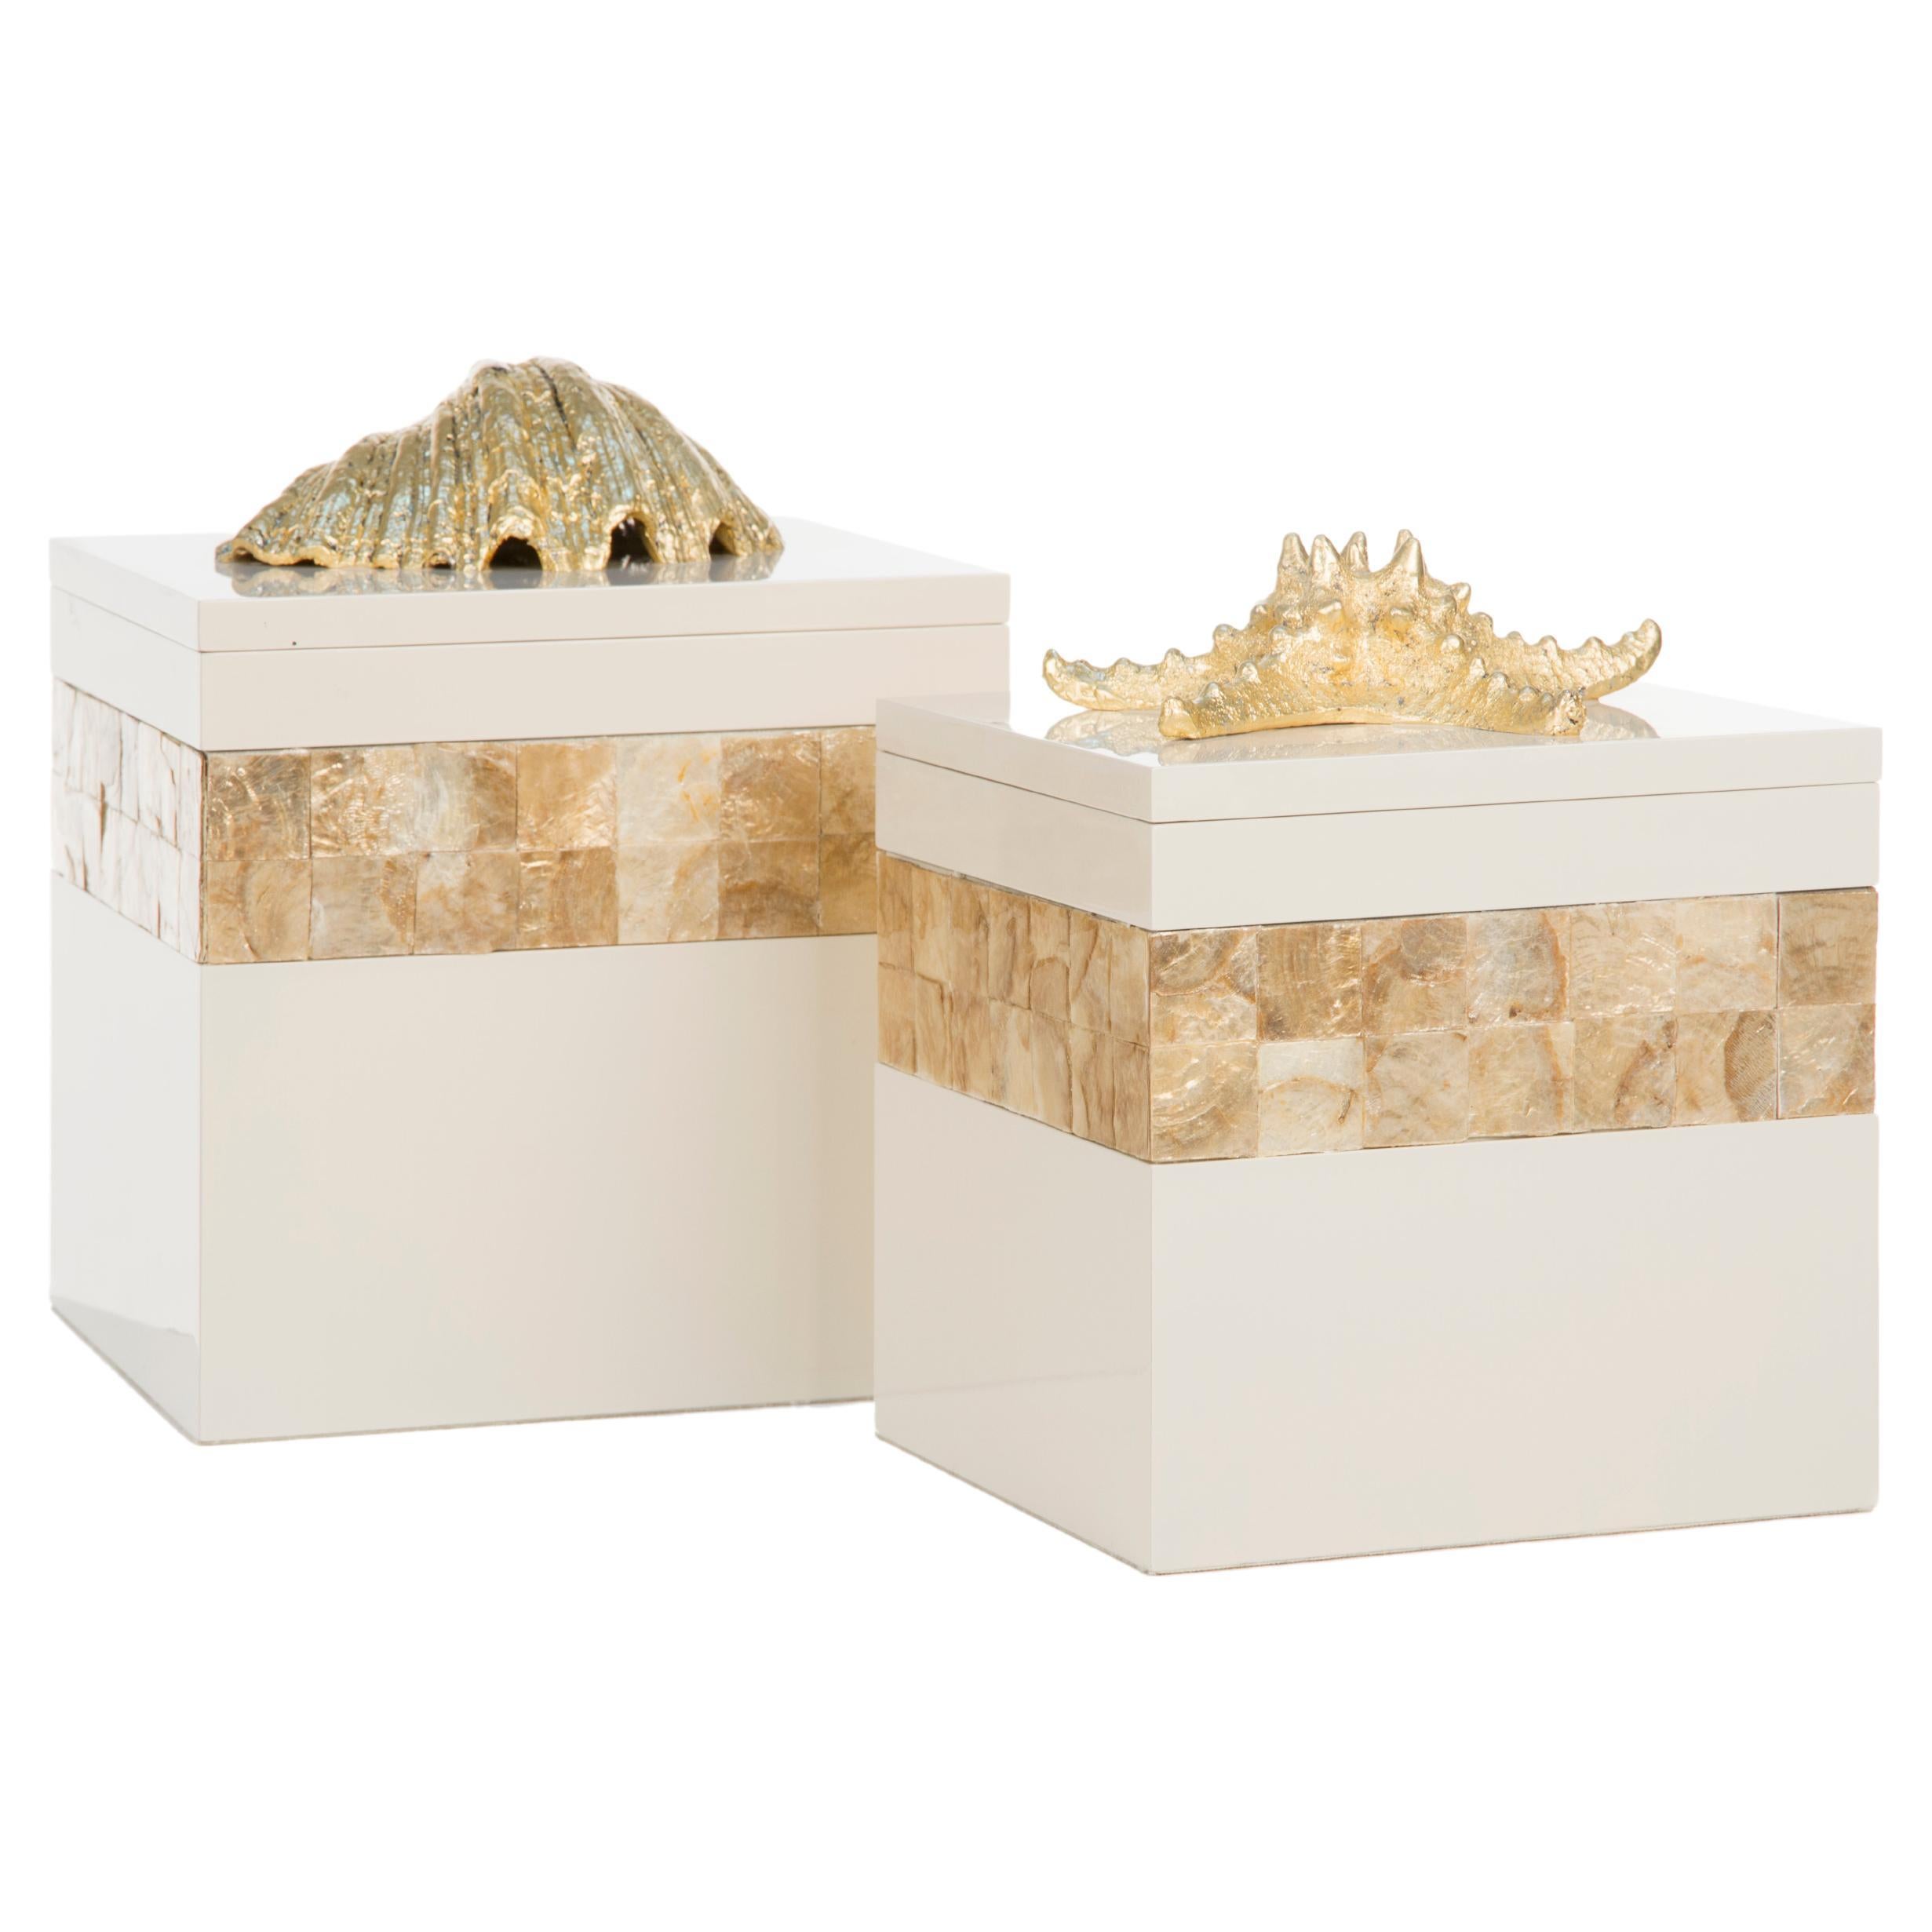 Set/2 Boxes, Wooden Boxes, Cream, Handmade in Portugal by Lusitanus Home